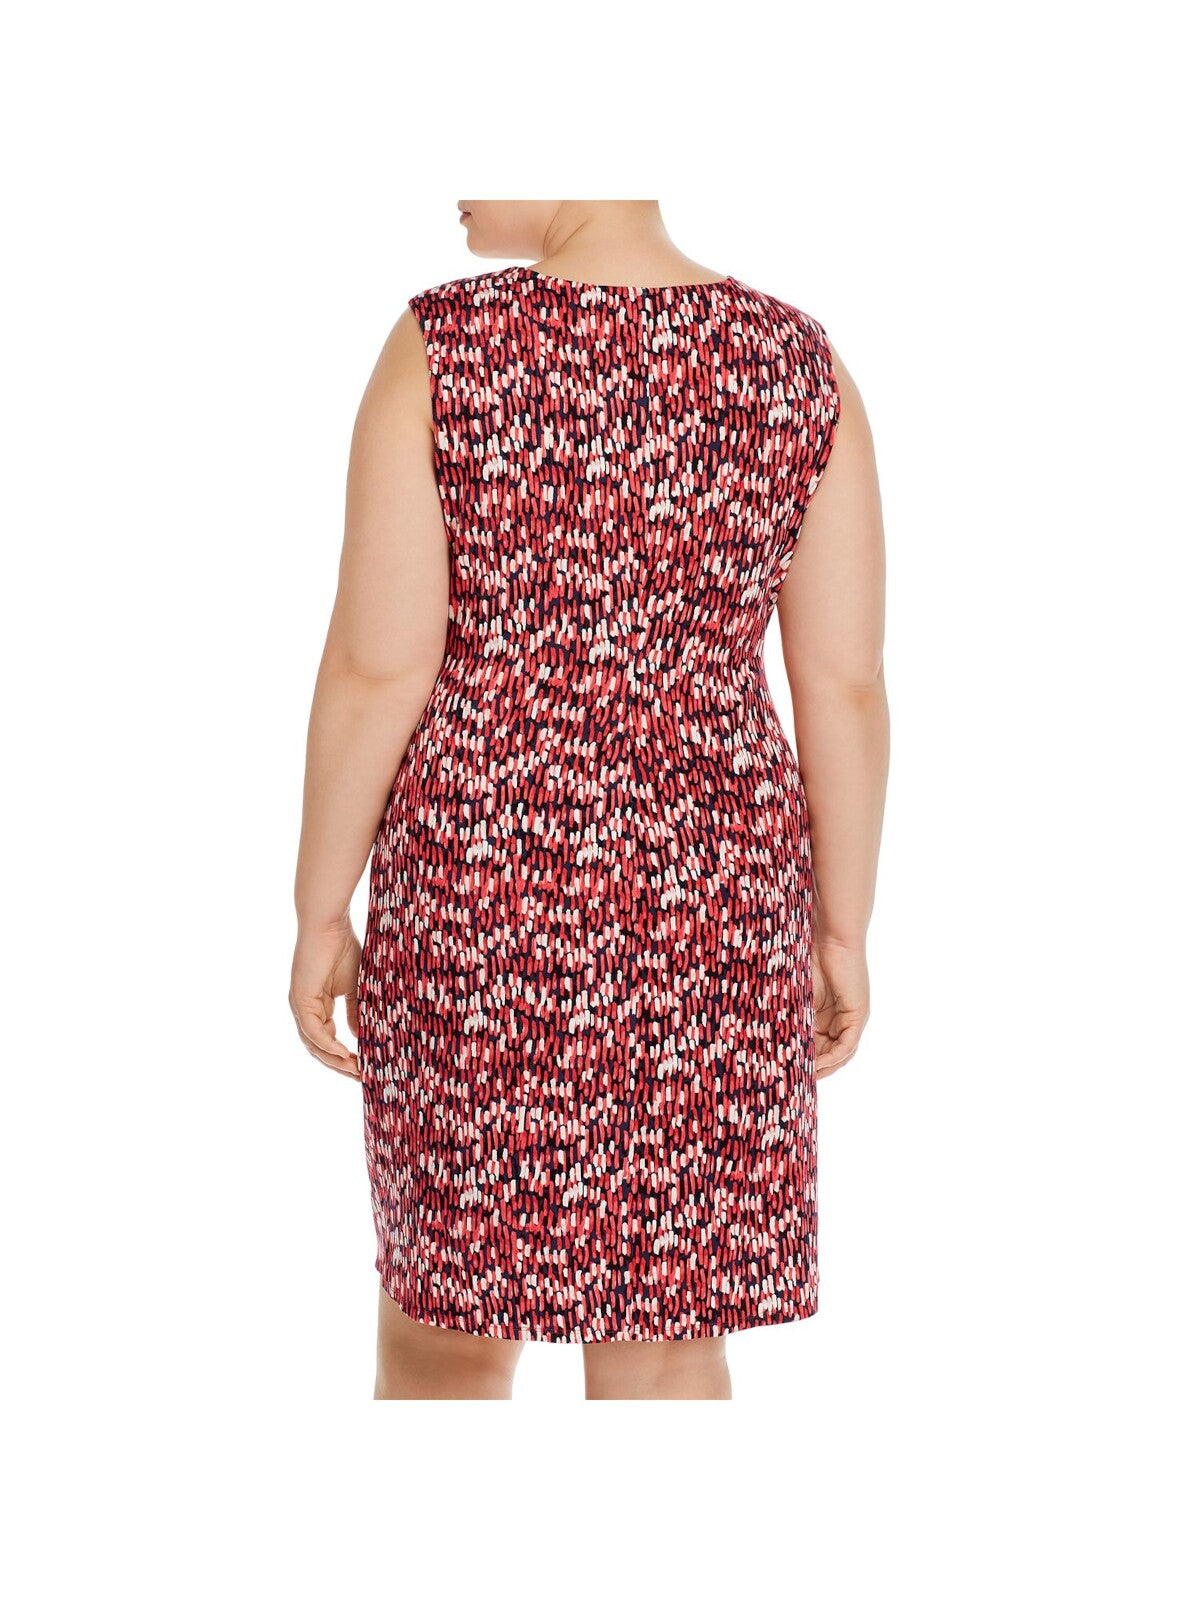 NIC+ZOE Womens Stretch Ruched Pull Over Styling Sleeveless Jewel Neck Above The Knee Cocktail Sheath Dress